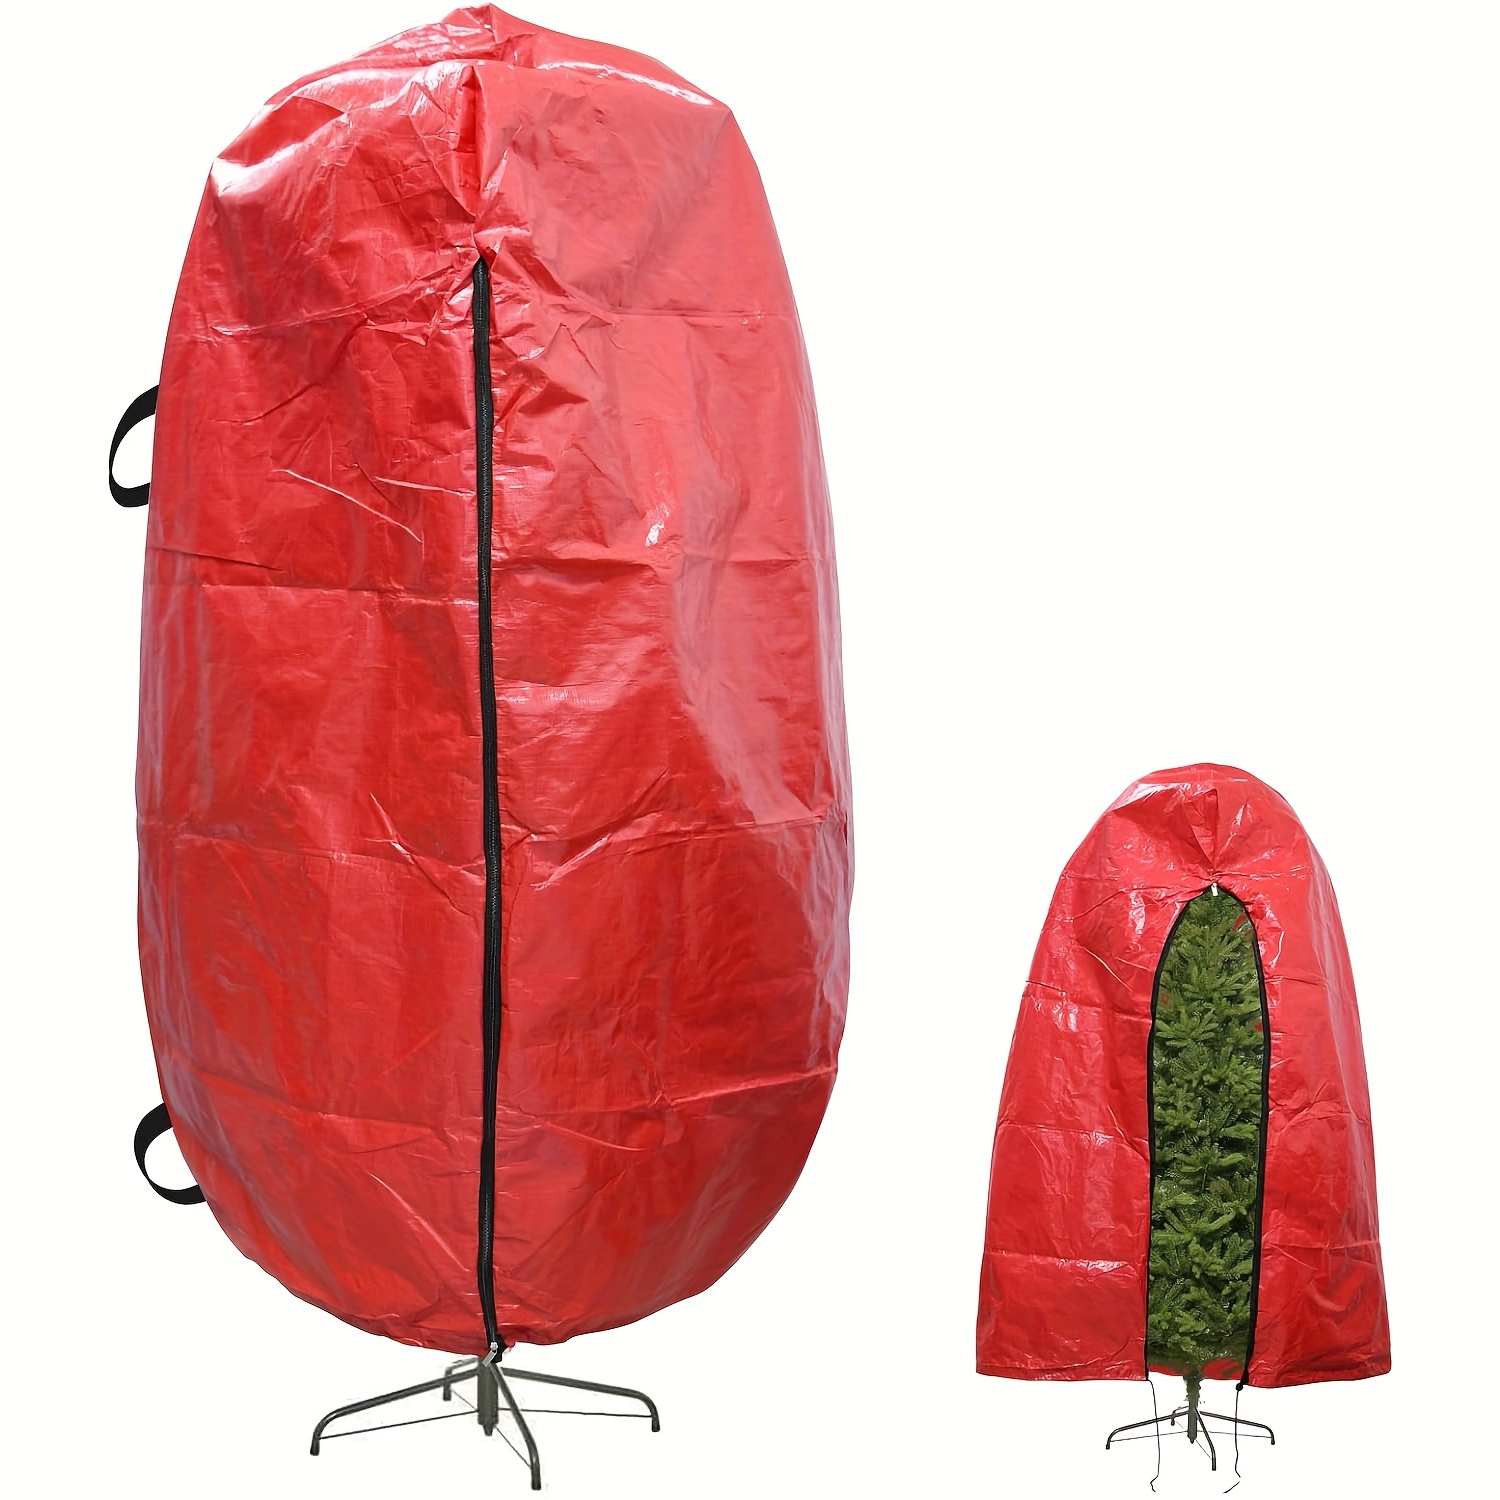 VerPetridure Clearance Christmas Tree Storage Bag Cover Protect